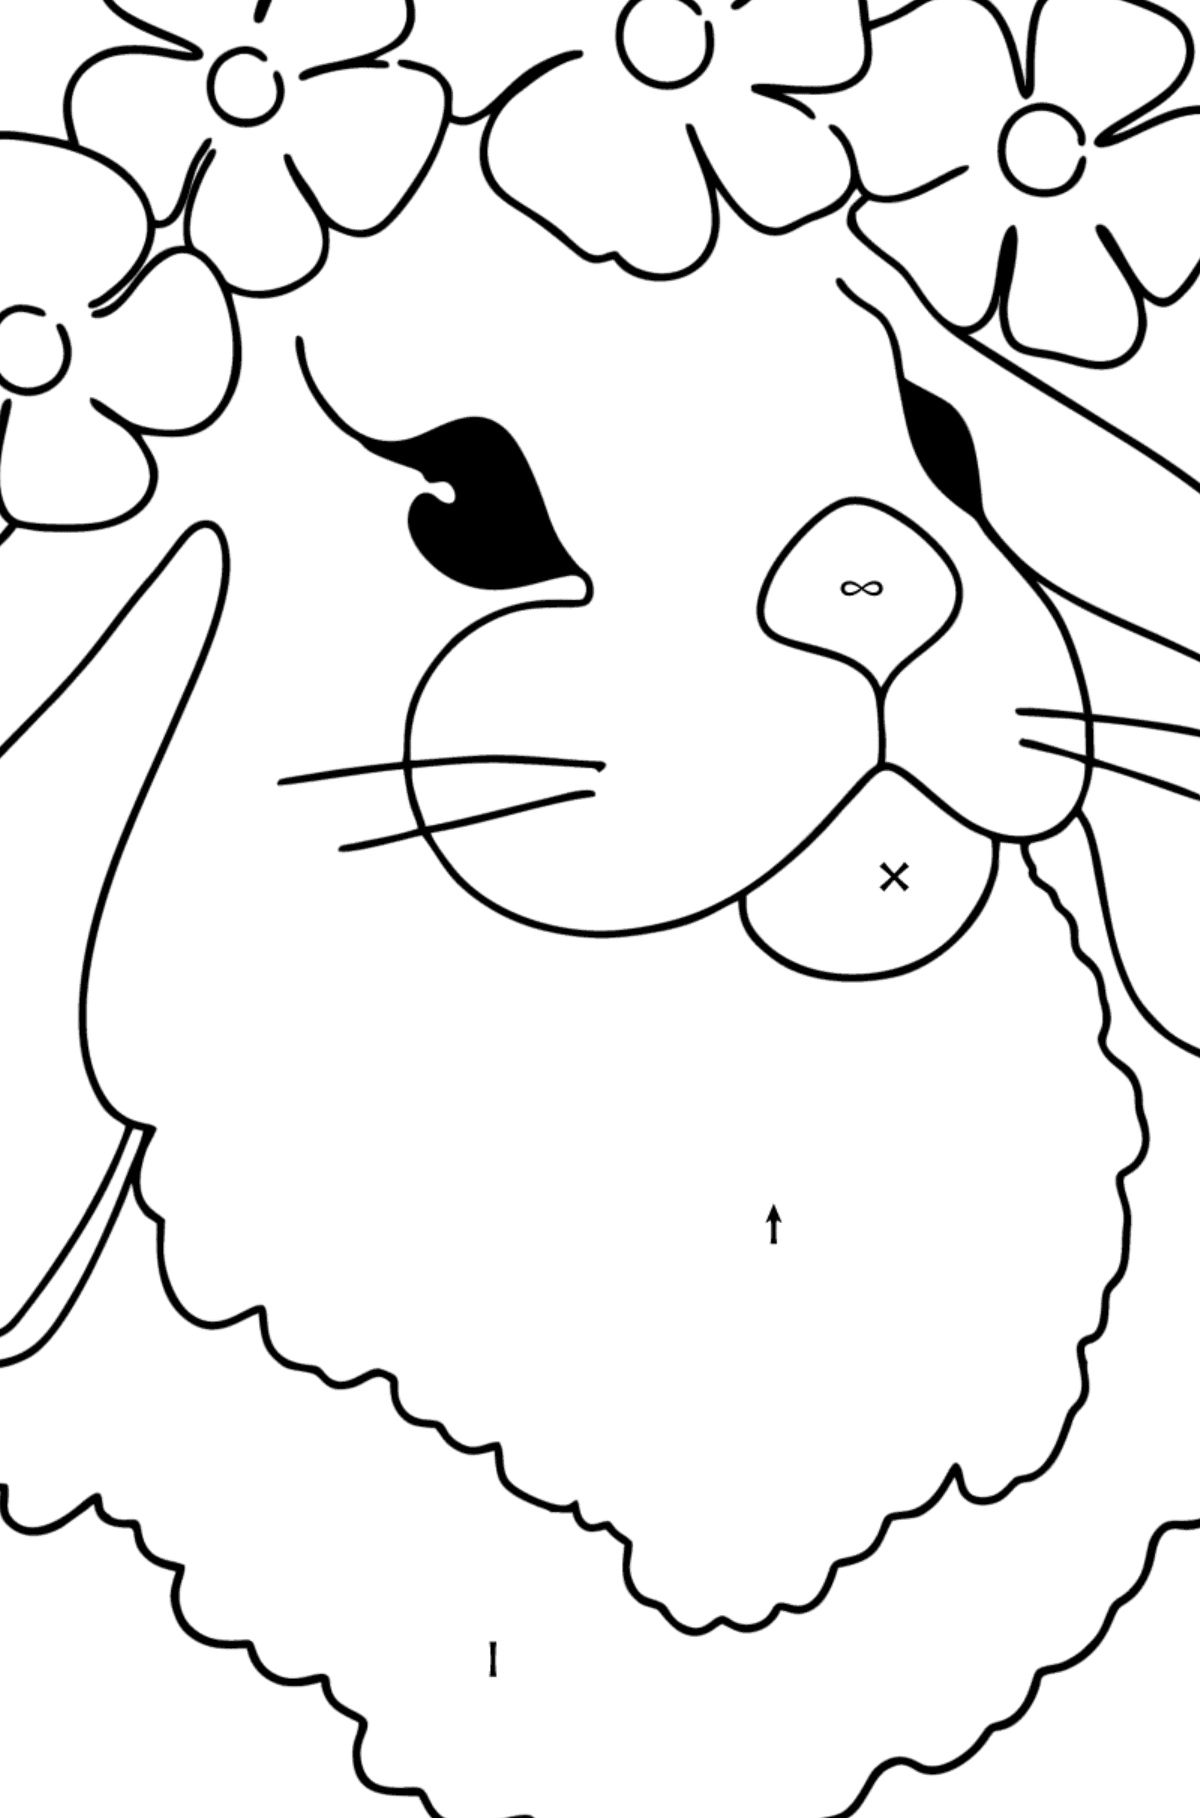 Hare Face coloring page - Coloring by Symbols for Kids